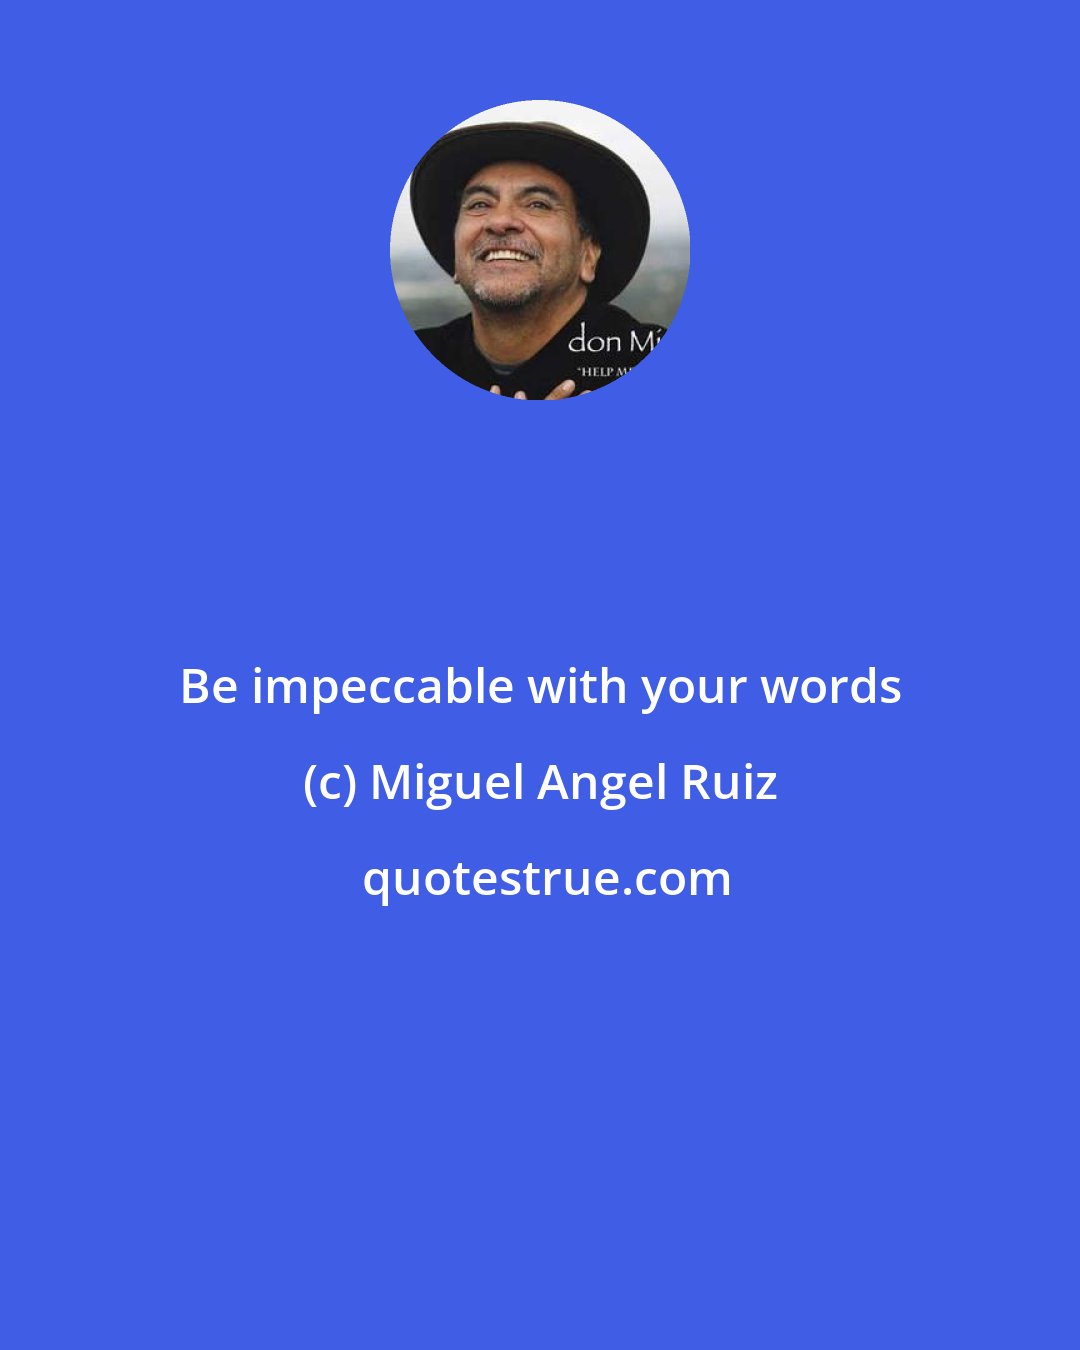 Miguel Angel Ruiz: Be impeccable with your words